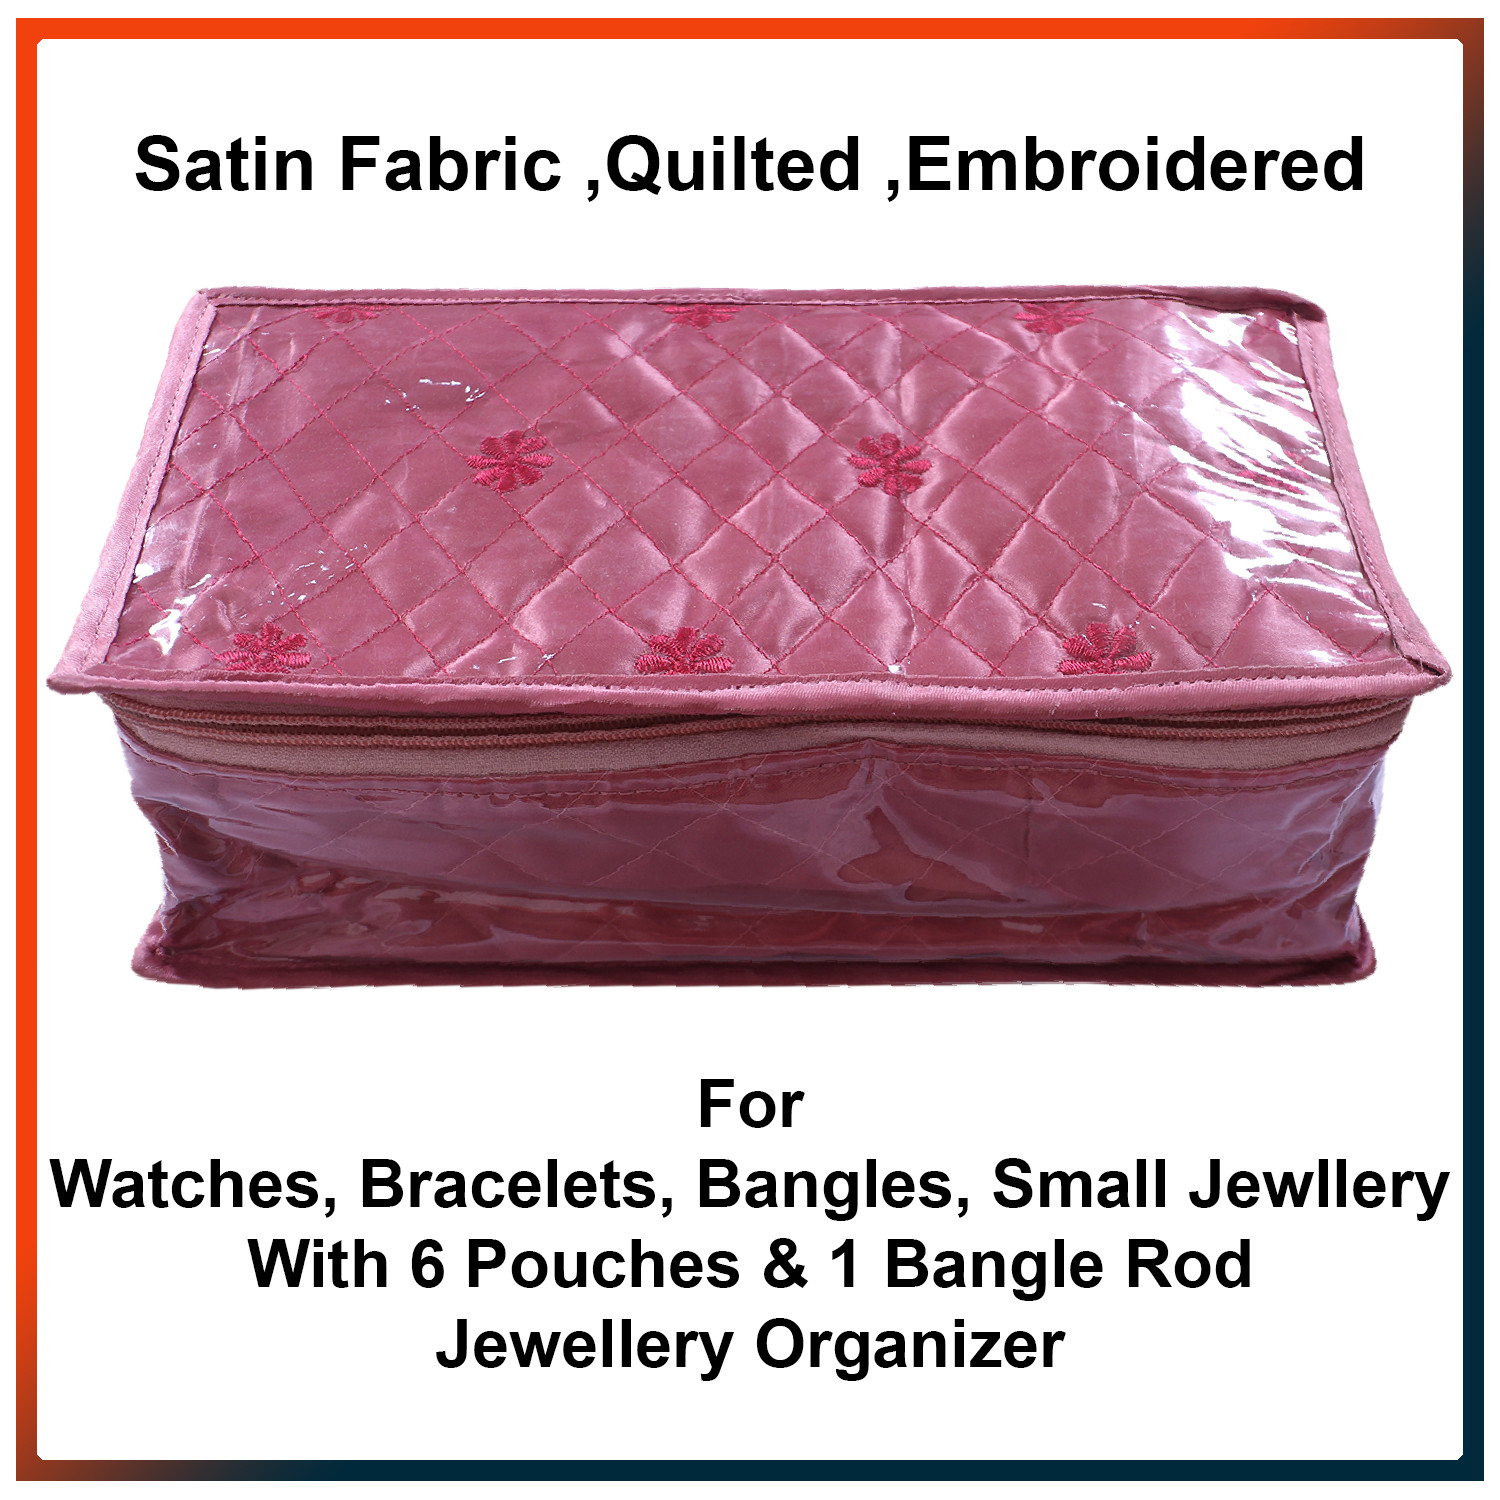 Kuber Industries PVC Laminated Jewellery Organizer For Watches, Bracelets, Bangles, Small Jewllery With 6 Pouches & 1 Bangle Rod (Pink)